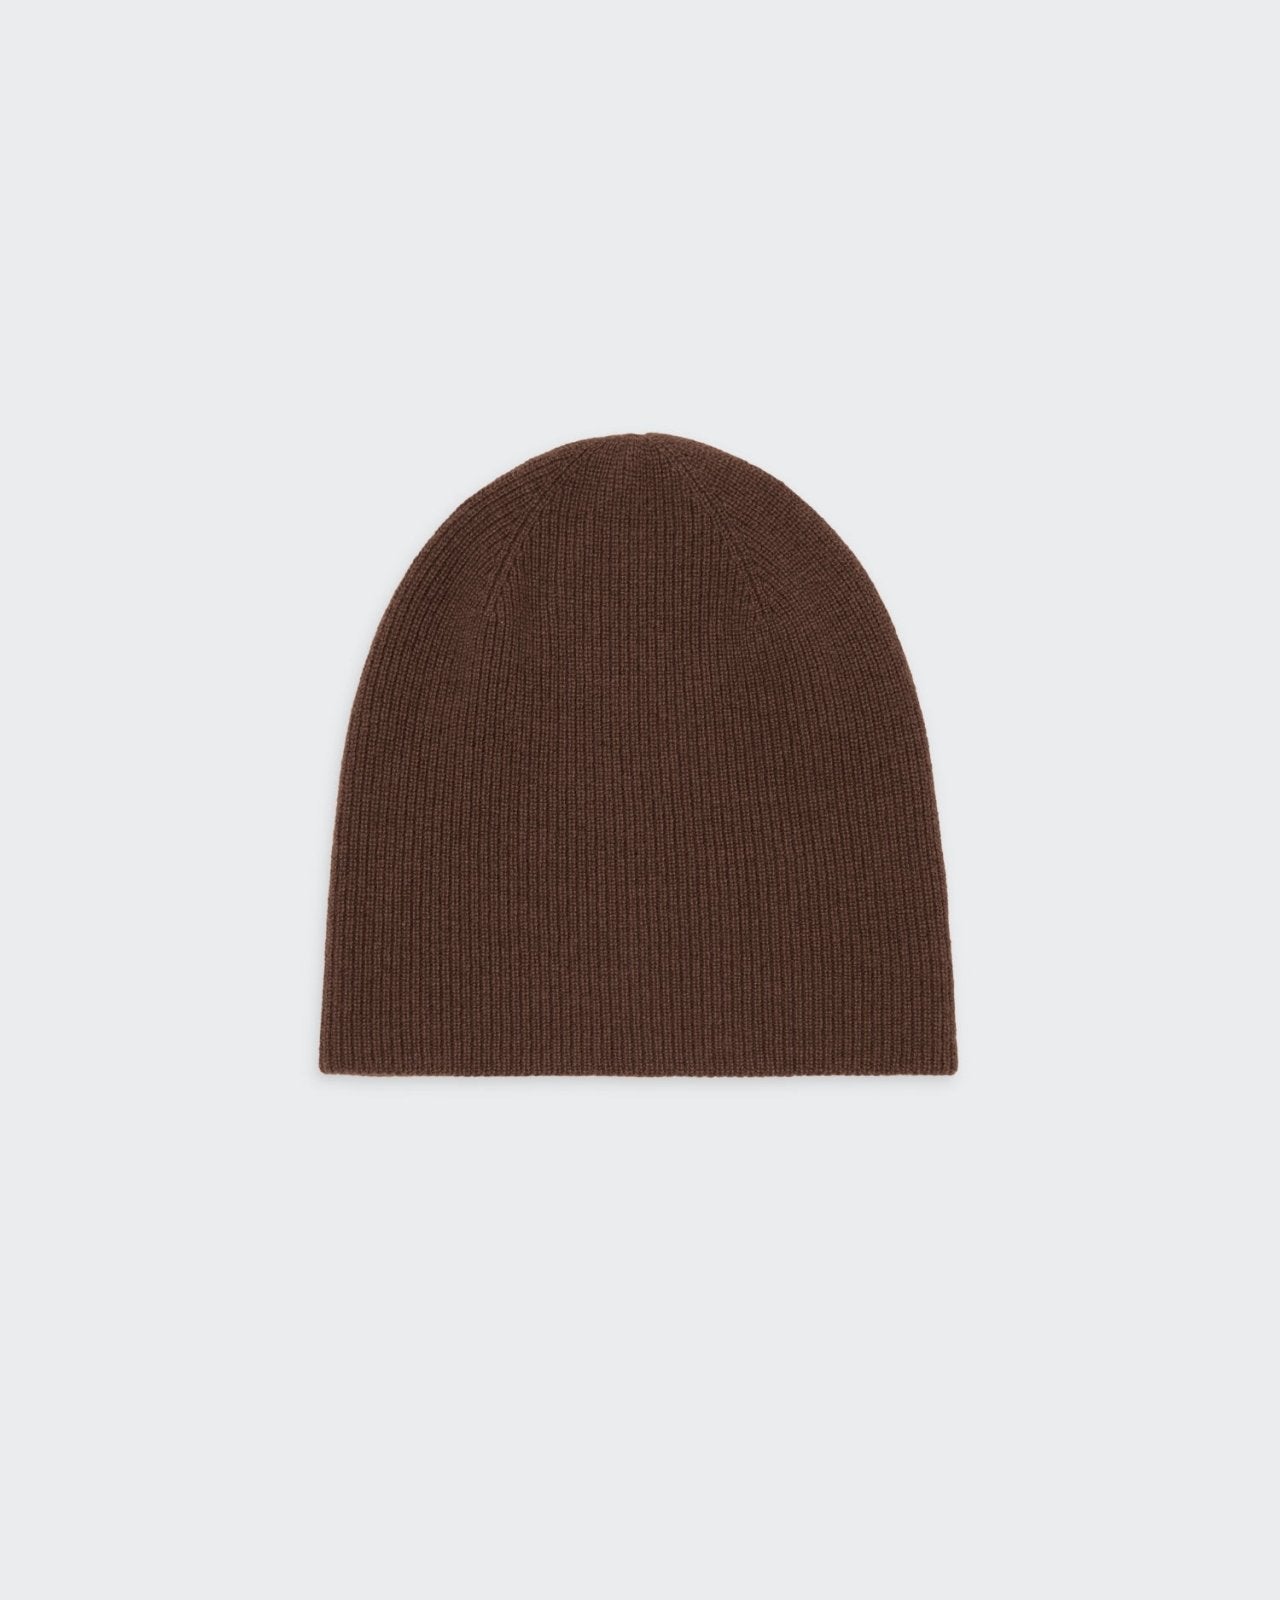 Residence The - Blush/Walnut Guest In – Inside-Out! Hat